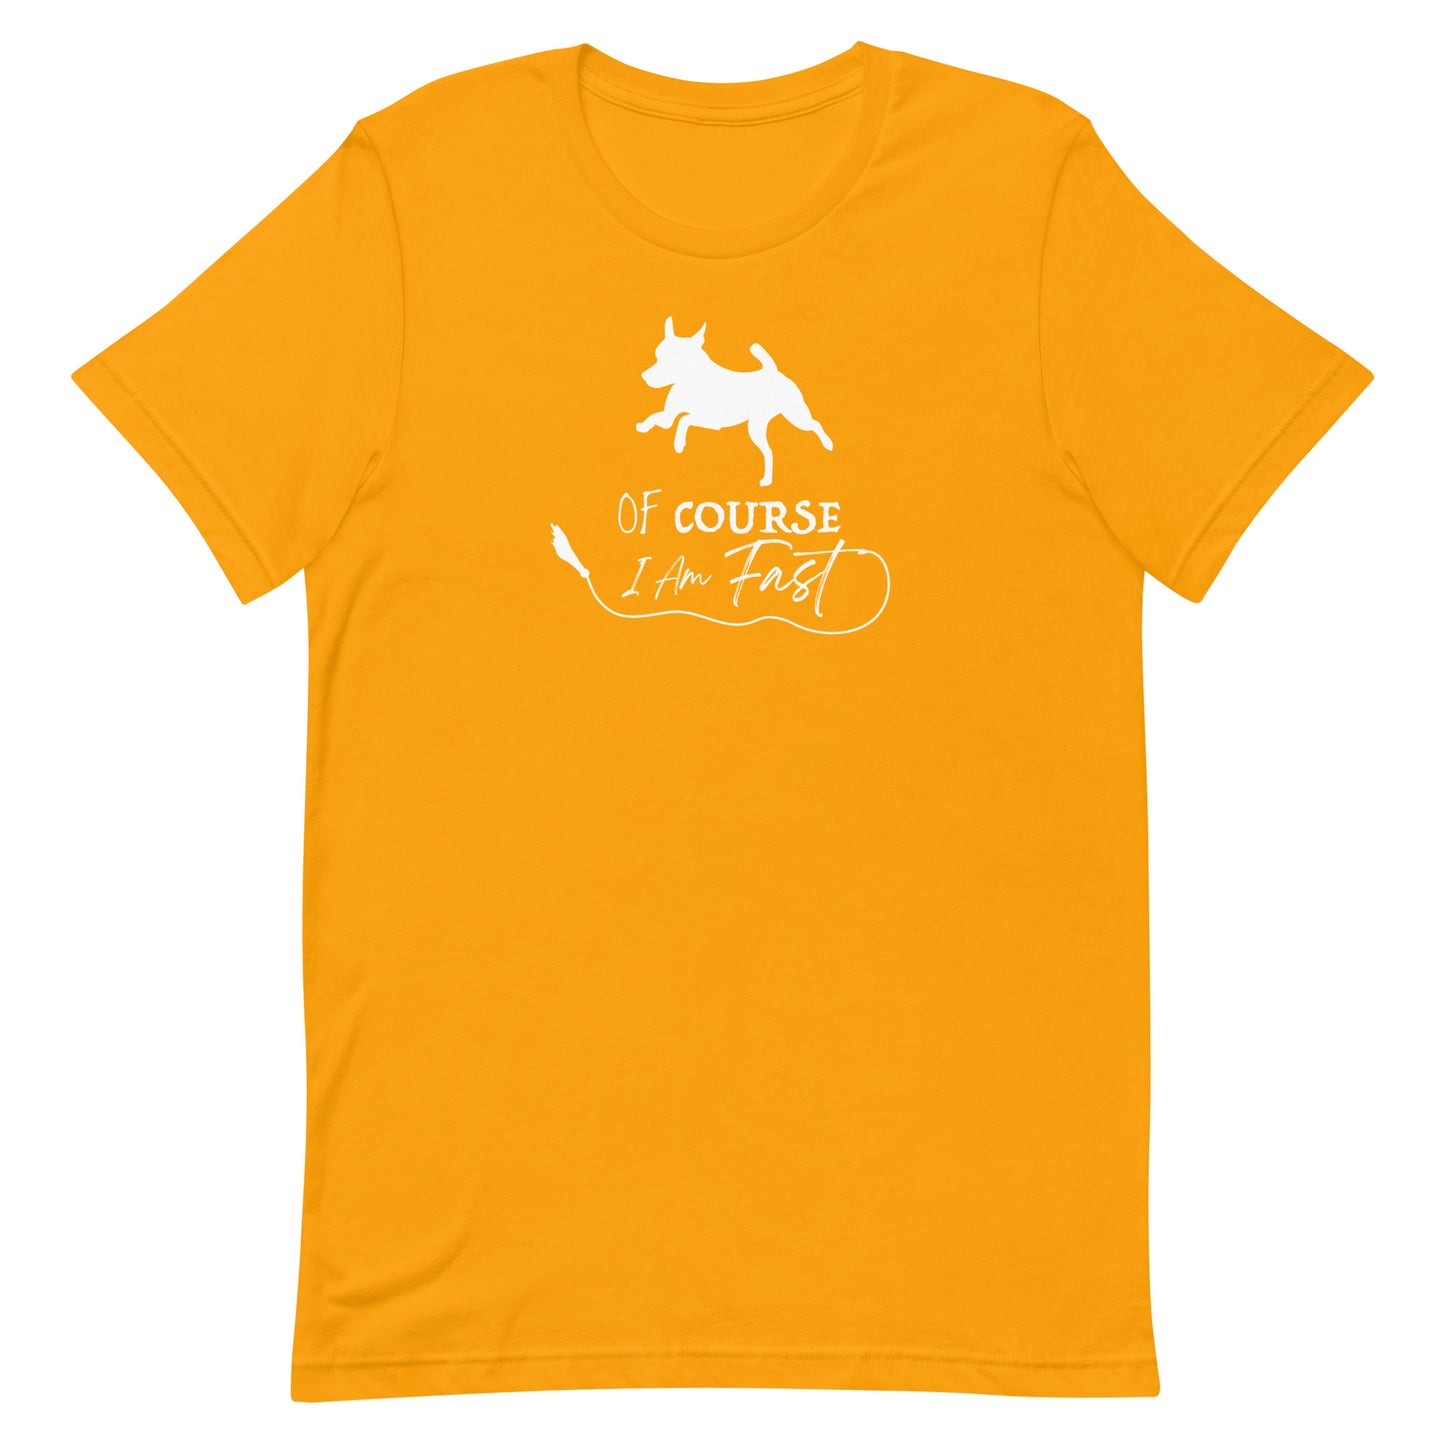 OF COURSE FAST- Fox Terrier - Unisex t-shirt